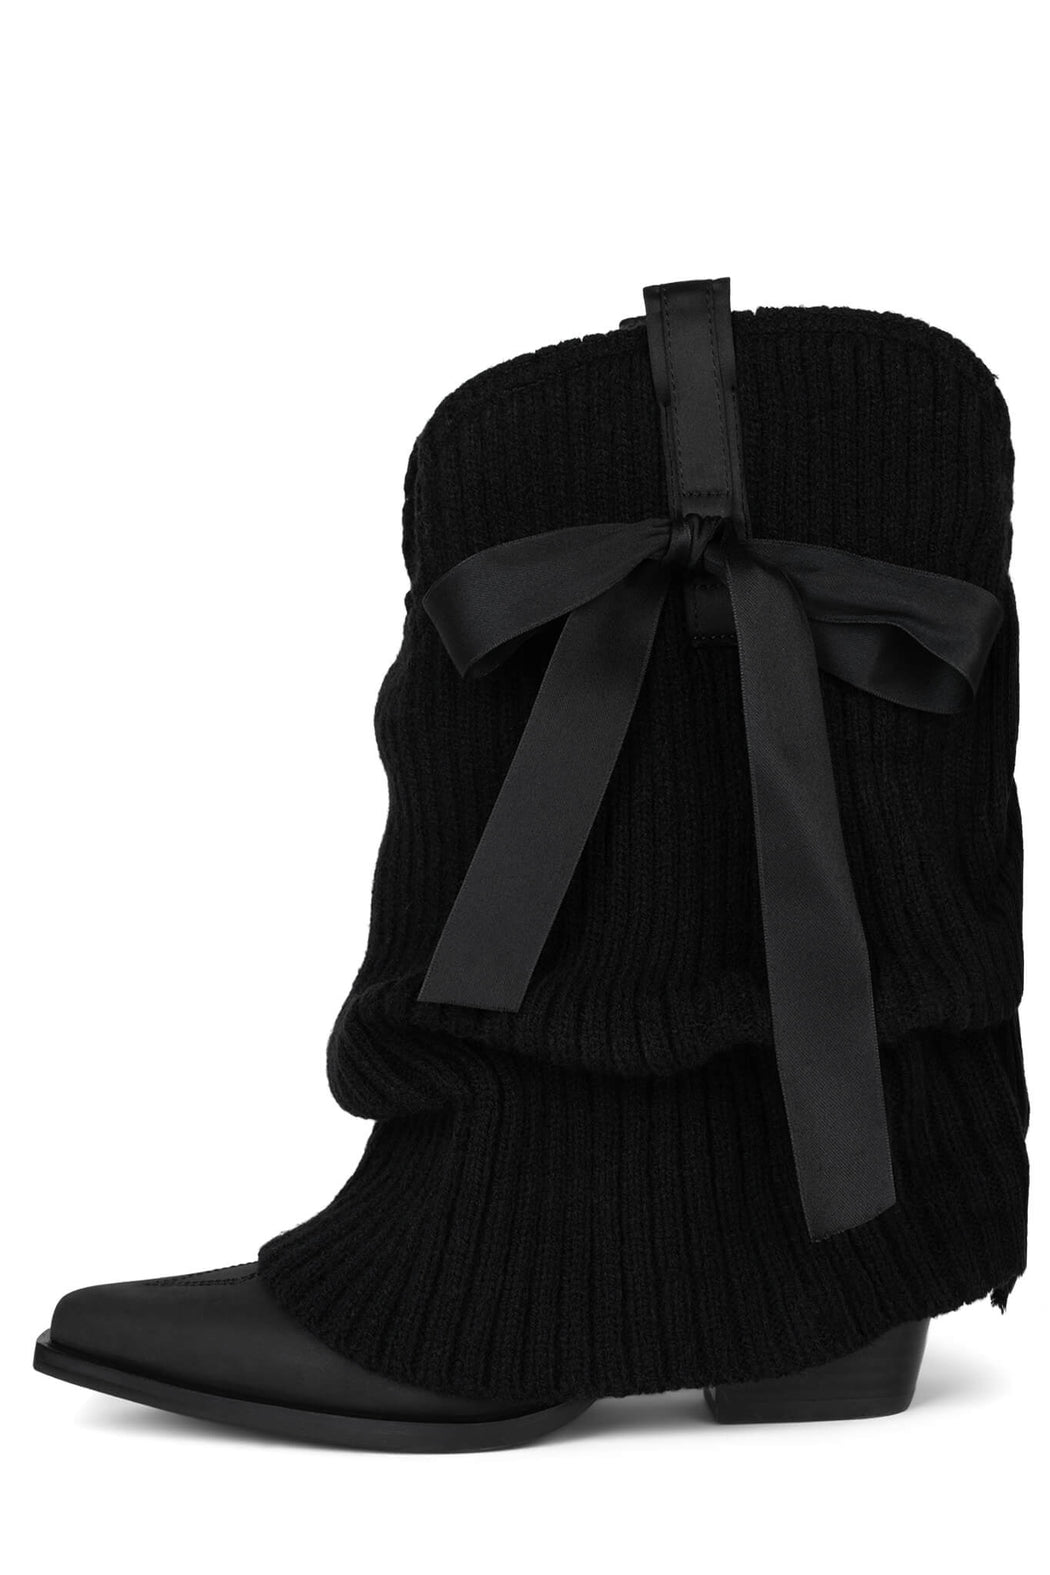 JC x FP x UL CENTER STAGE BOOT IN BLACK